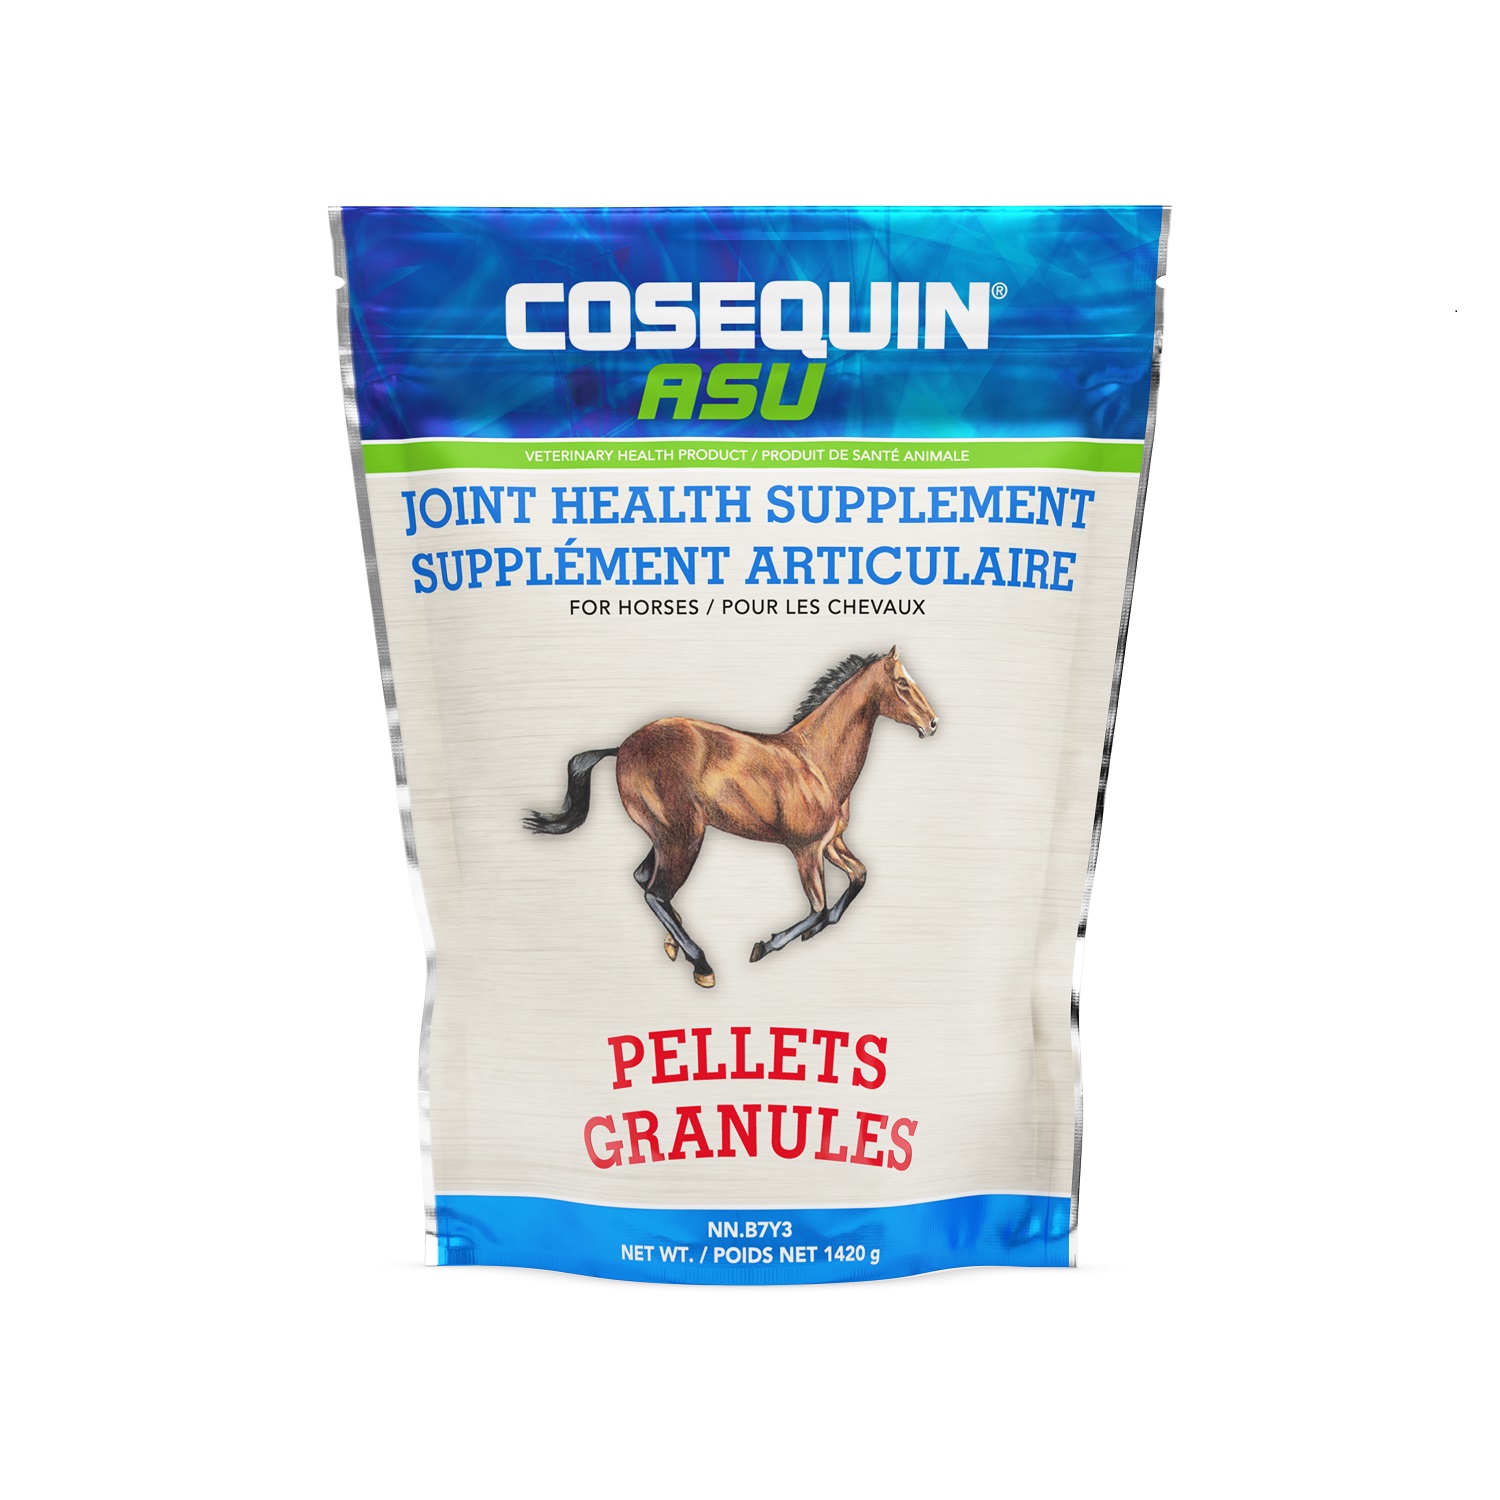 Horse supplements, including general performance supplements, joint supplements, supplements for weight gain, building muscle, electrolytes, hoof and skin supplements,  anti-inflammatory